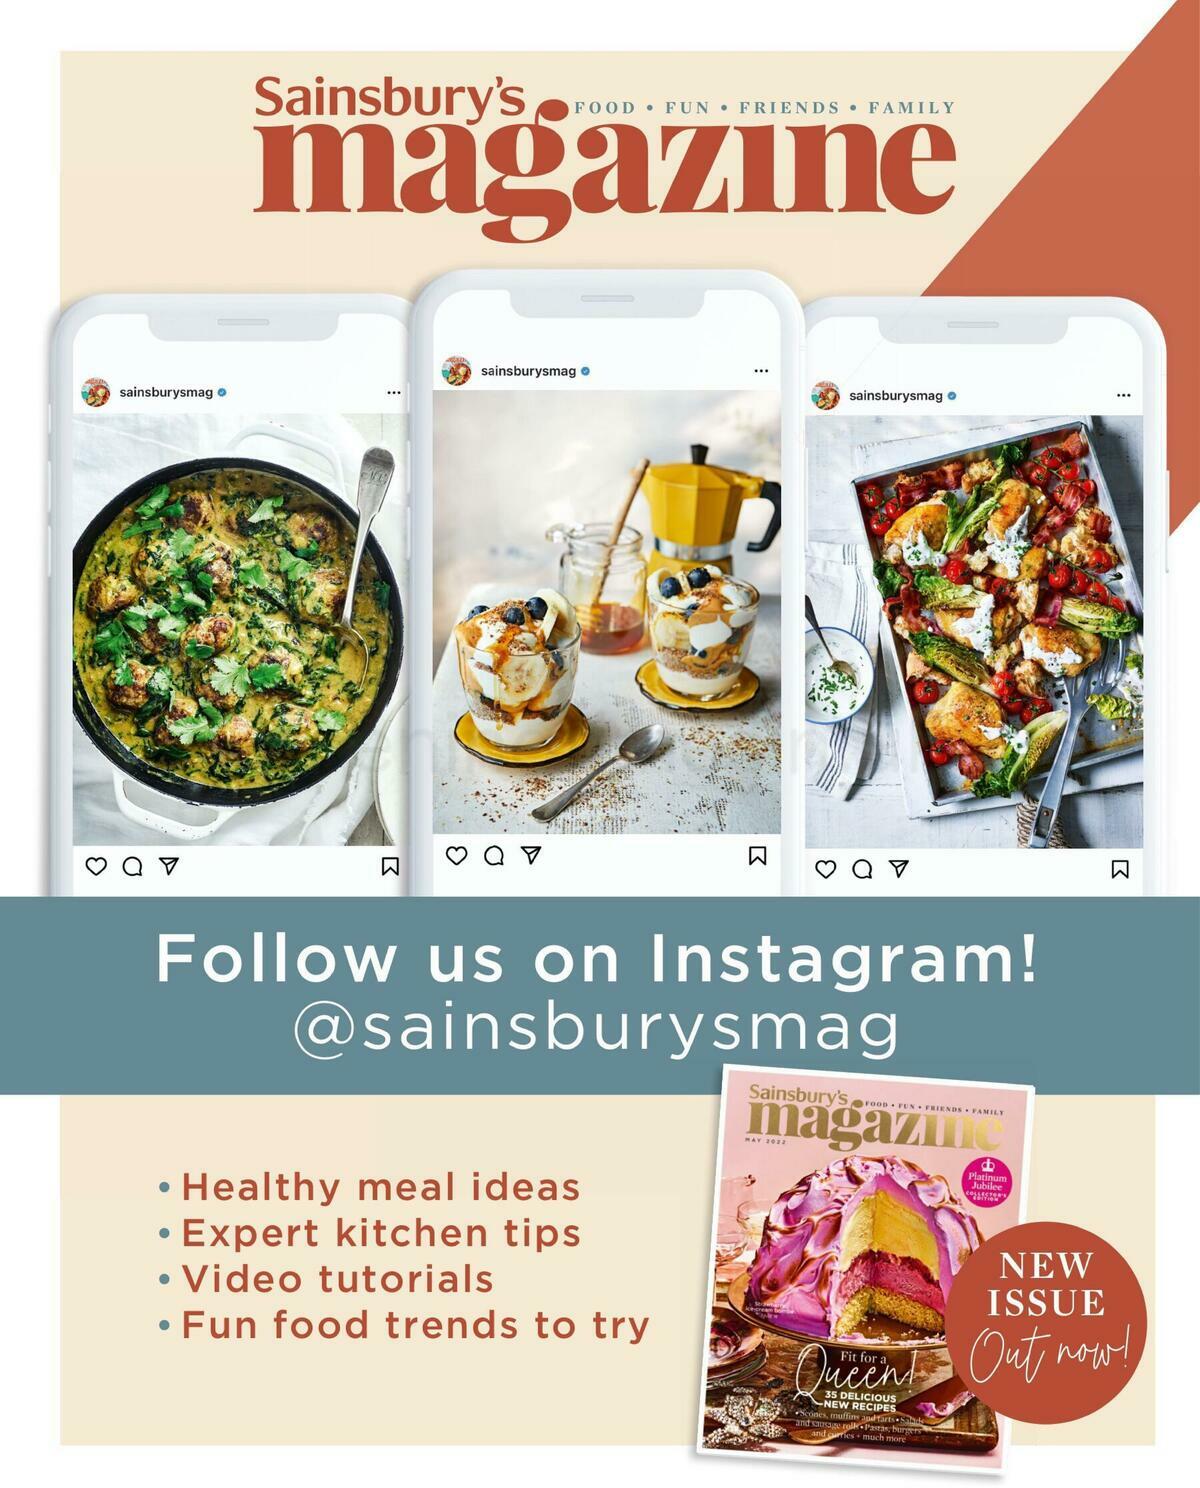 Sainsbury's Magazine – 28 Day Midlife Health Plan Offers from 20 May